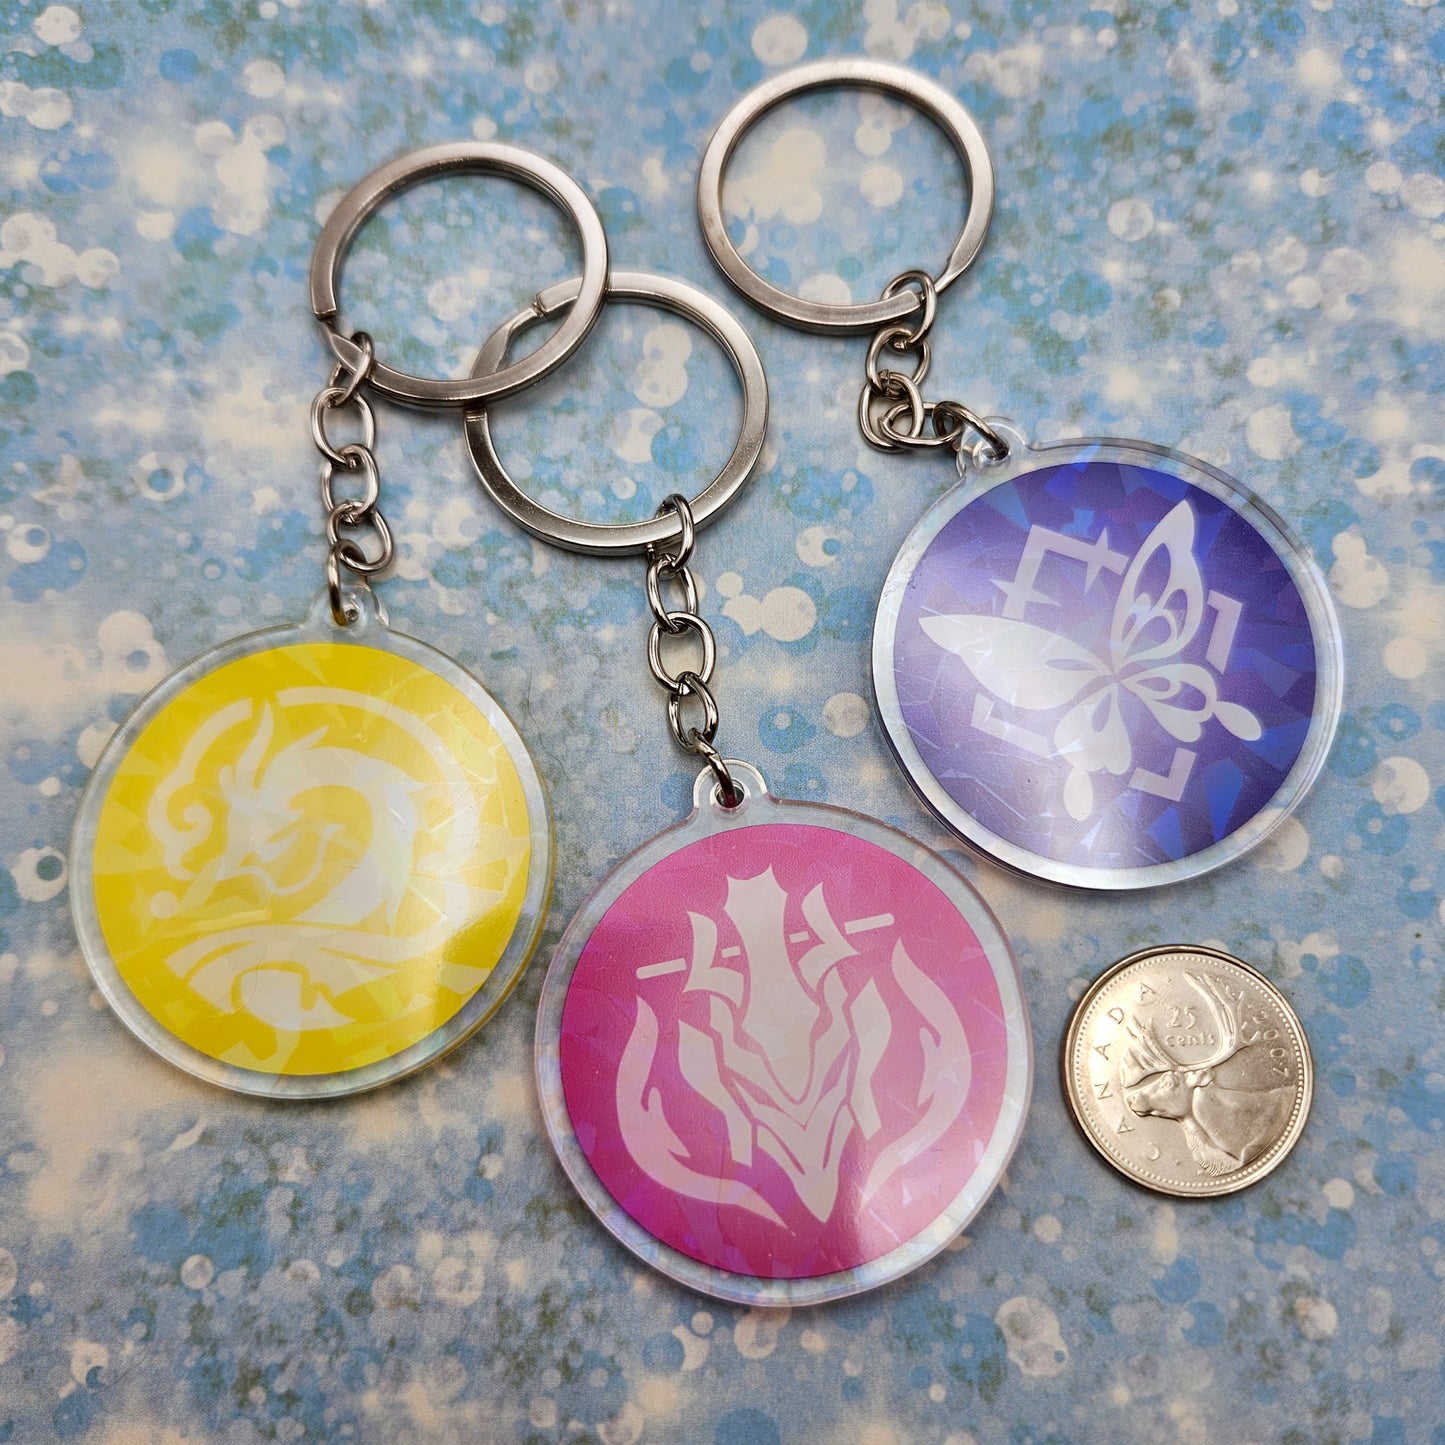 HSR Character Ultimate Keychains [PRE-ORDER]